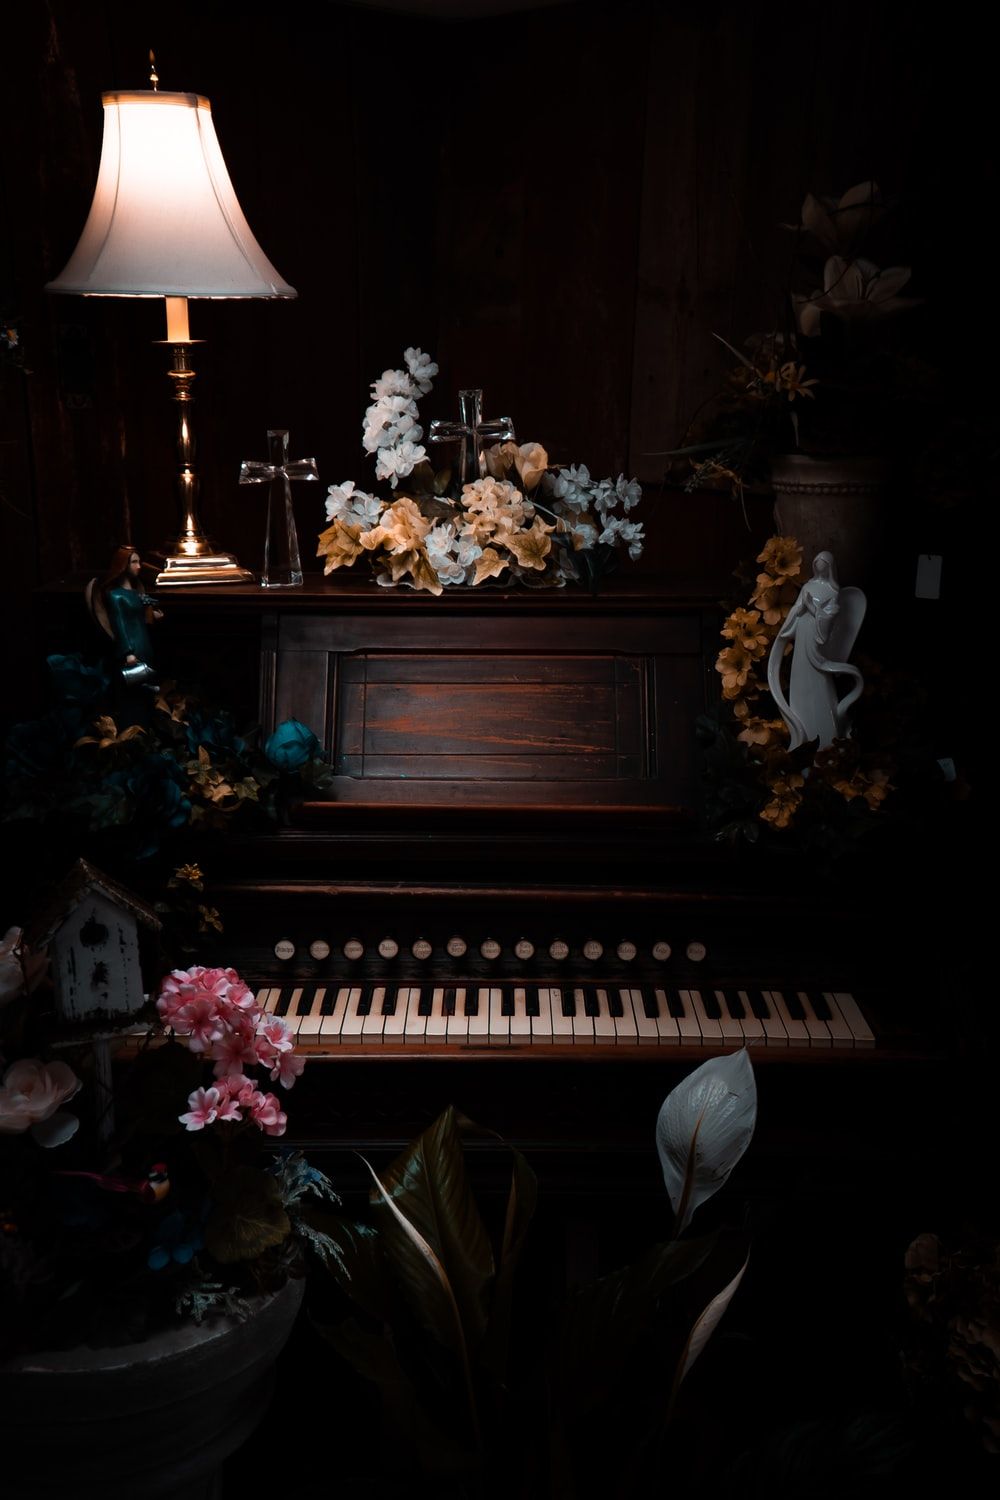 1000x1500 Piano Picture. Download Free Image & Stock Photo on WallpaperBat